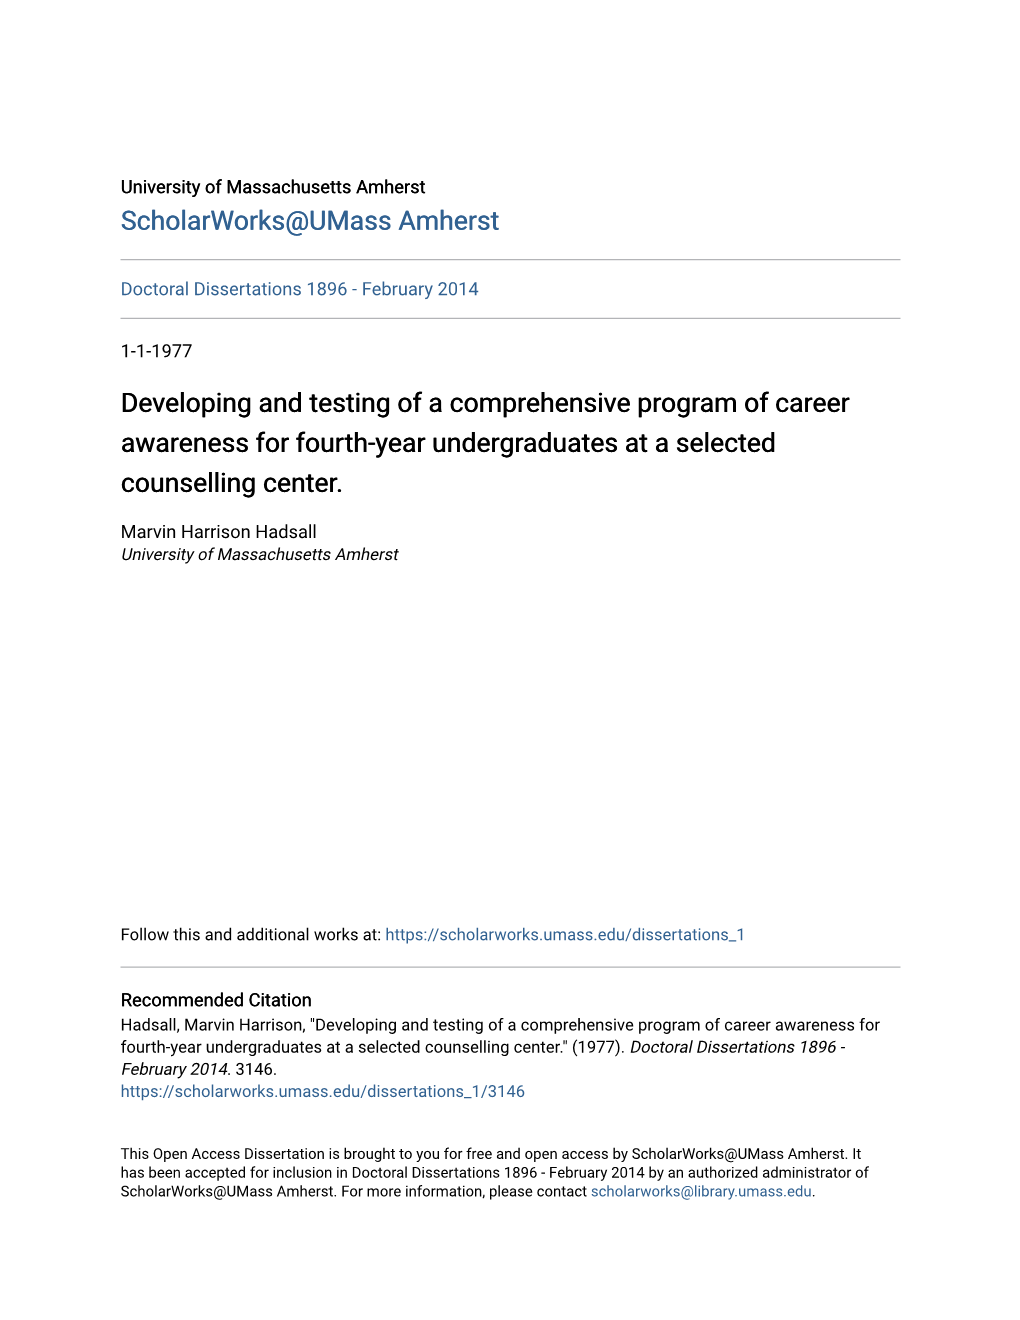 Developing and Testing of a Comprehensive Program of Career Awareness for Fourth-Year Undergraduates at a Selected Counselling Center